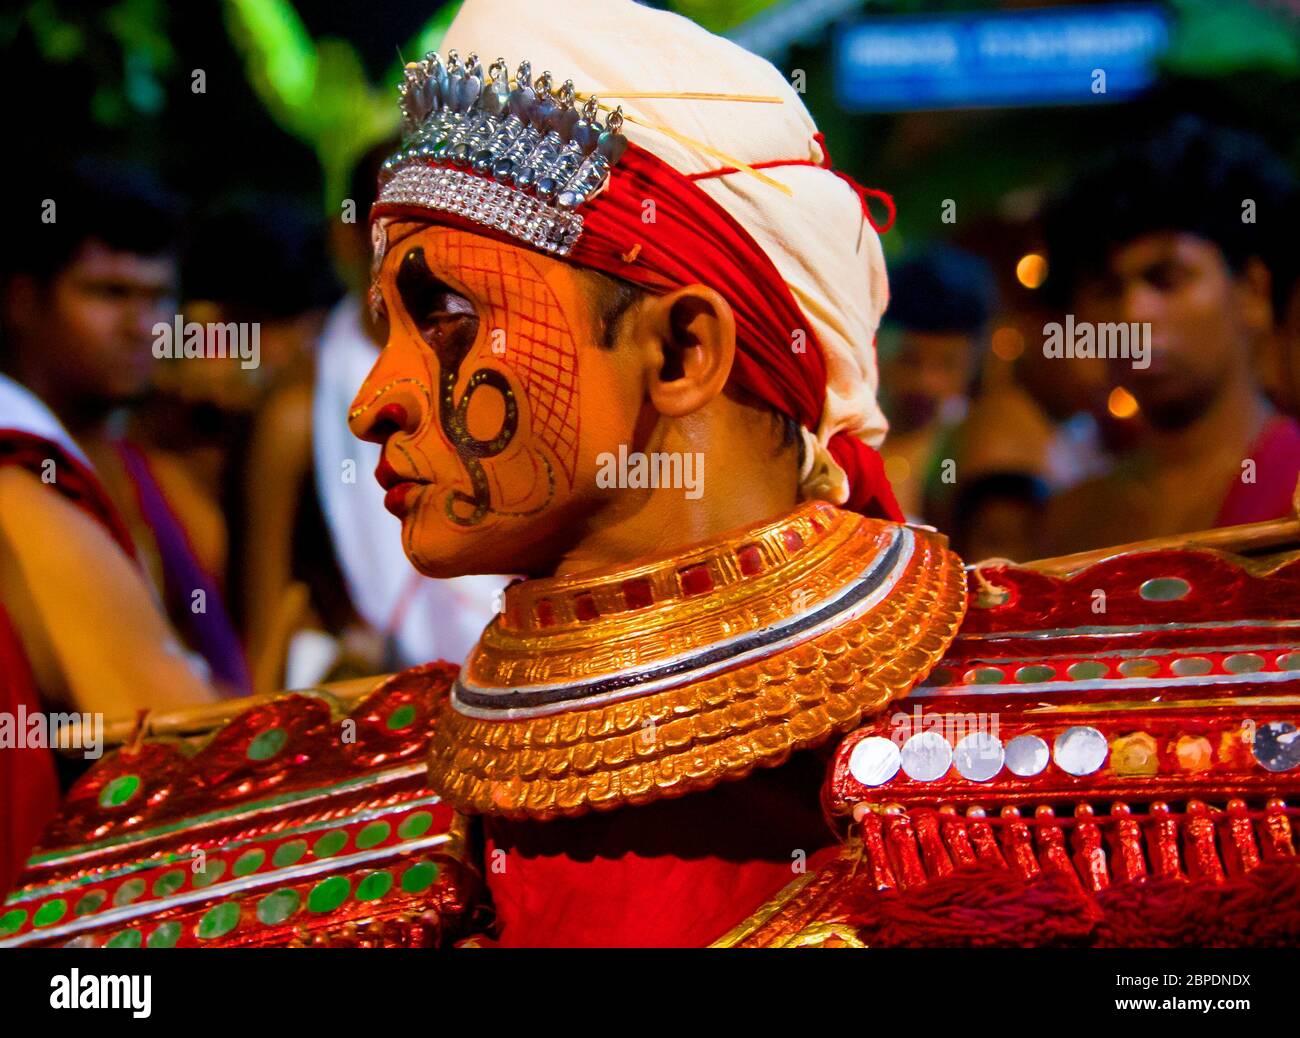 Nagakaali Theyyam | Ritual Art Form of Kerala, Thirra or Theyyam thira is a ritual dance performed in 'Kaavu'(grove)& temples of the Kerala, India Stock Photo